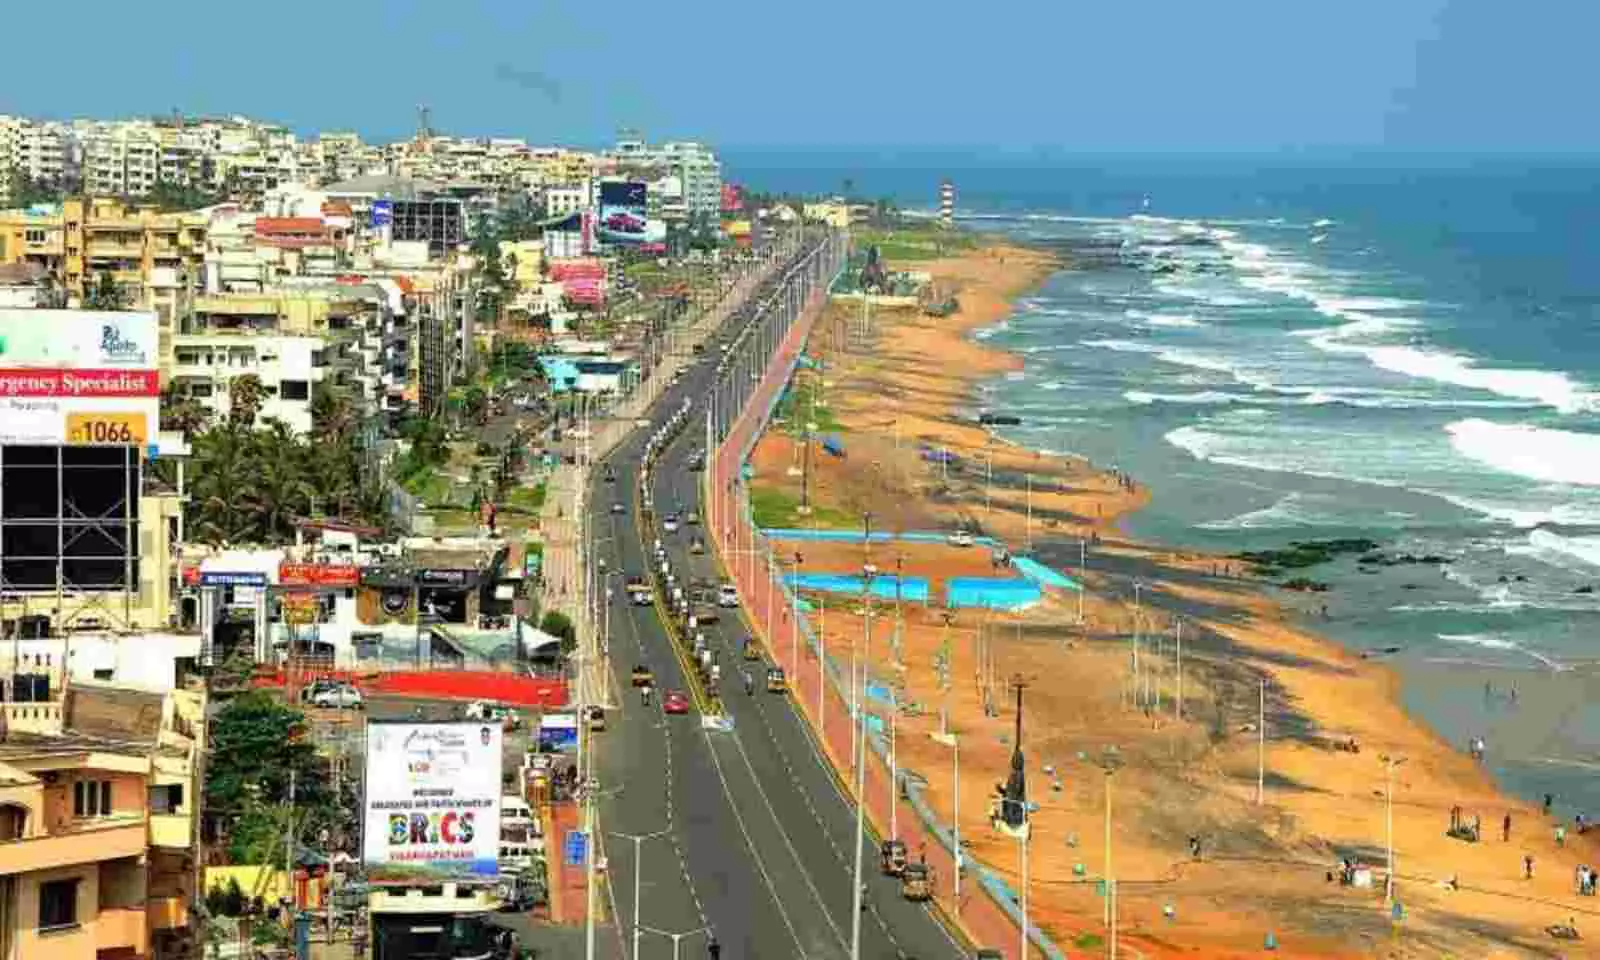 Central Government Says Visakhapatnam is Just a City Not The Capital of Andhra Pradesh